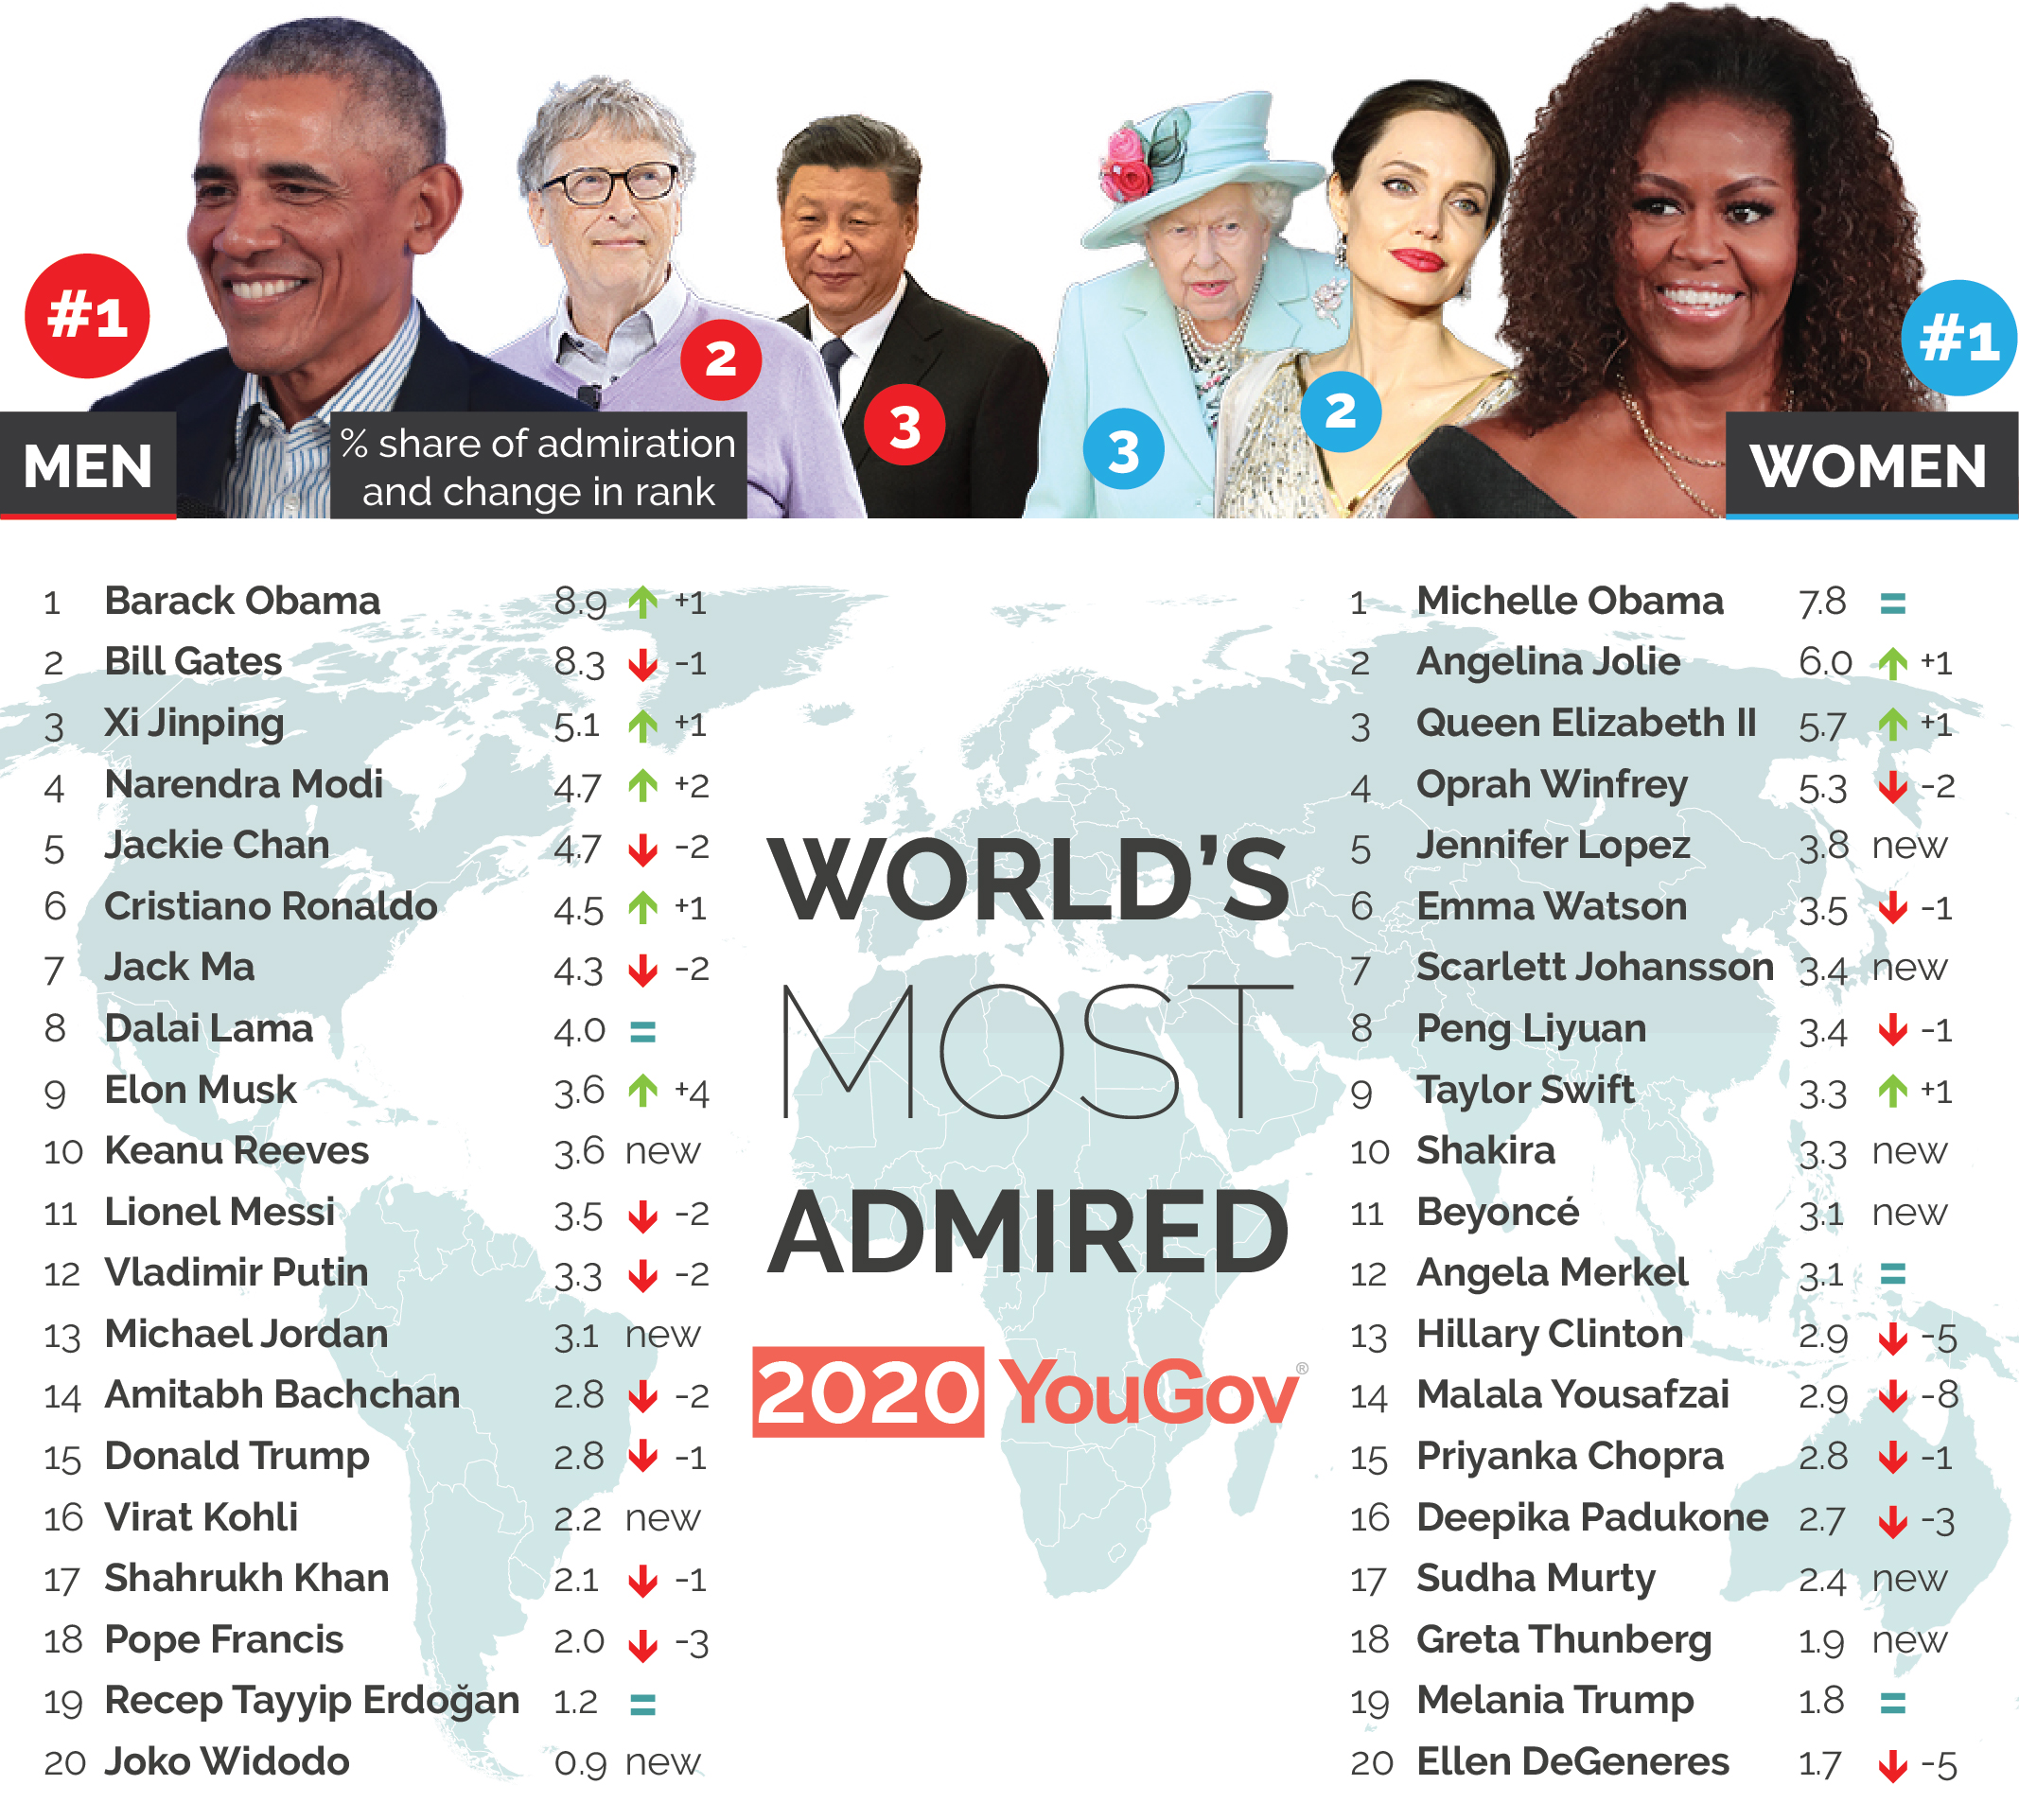 World's most admired 2020